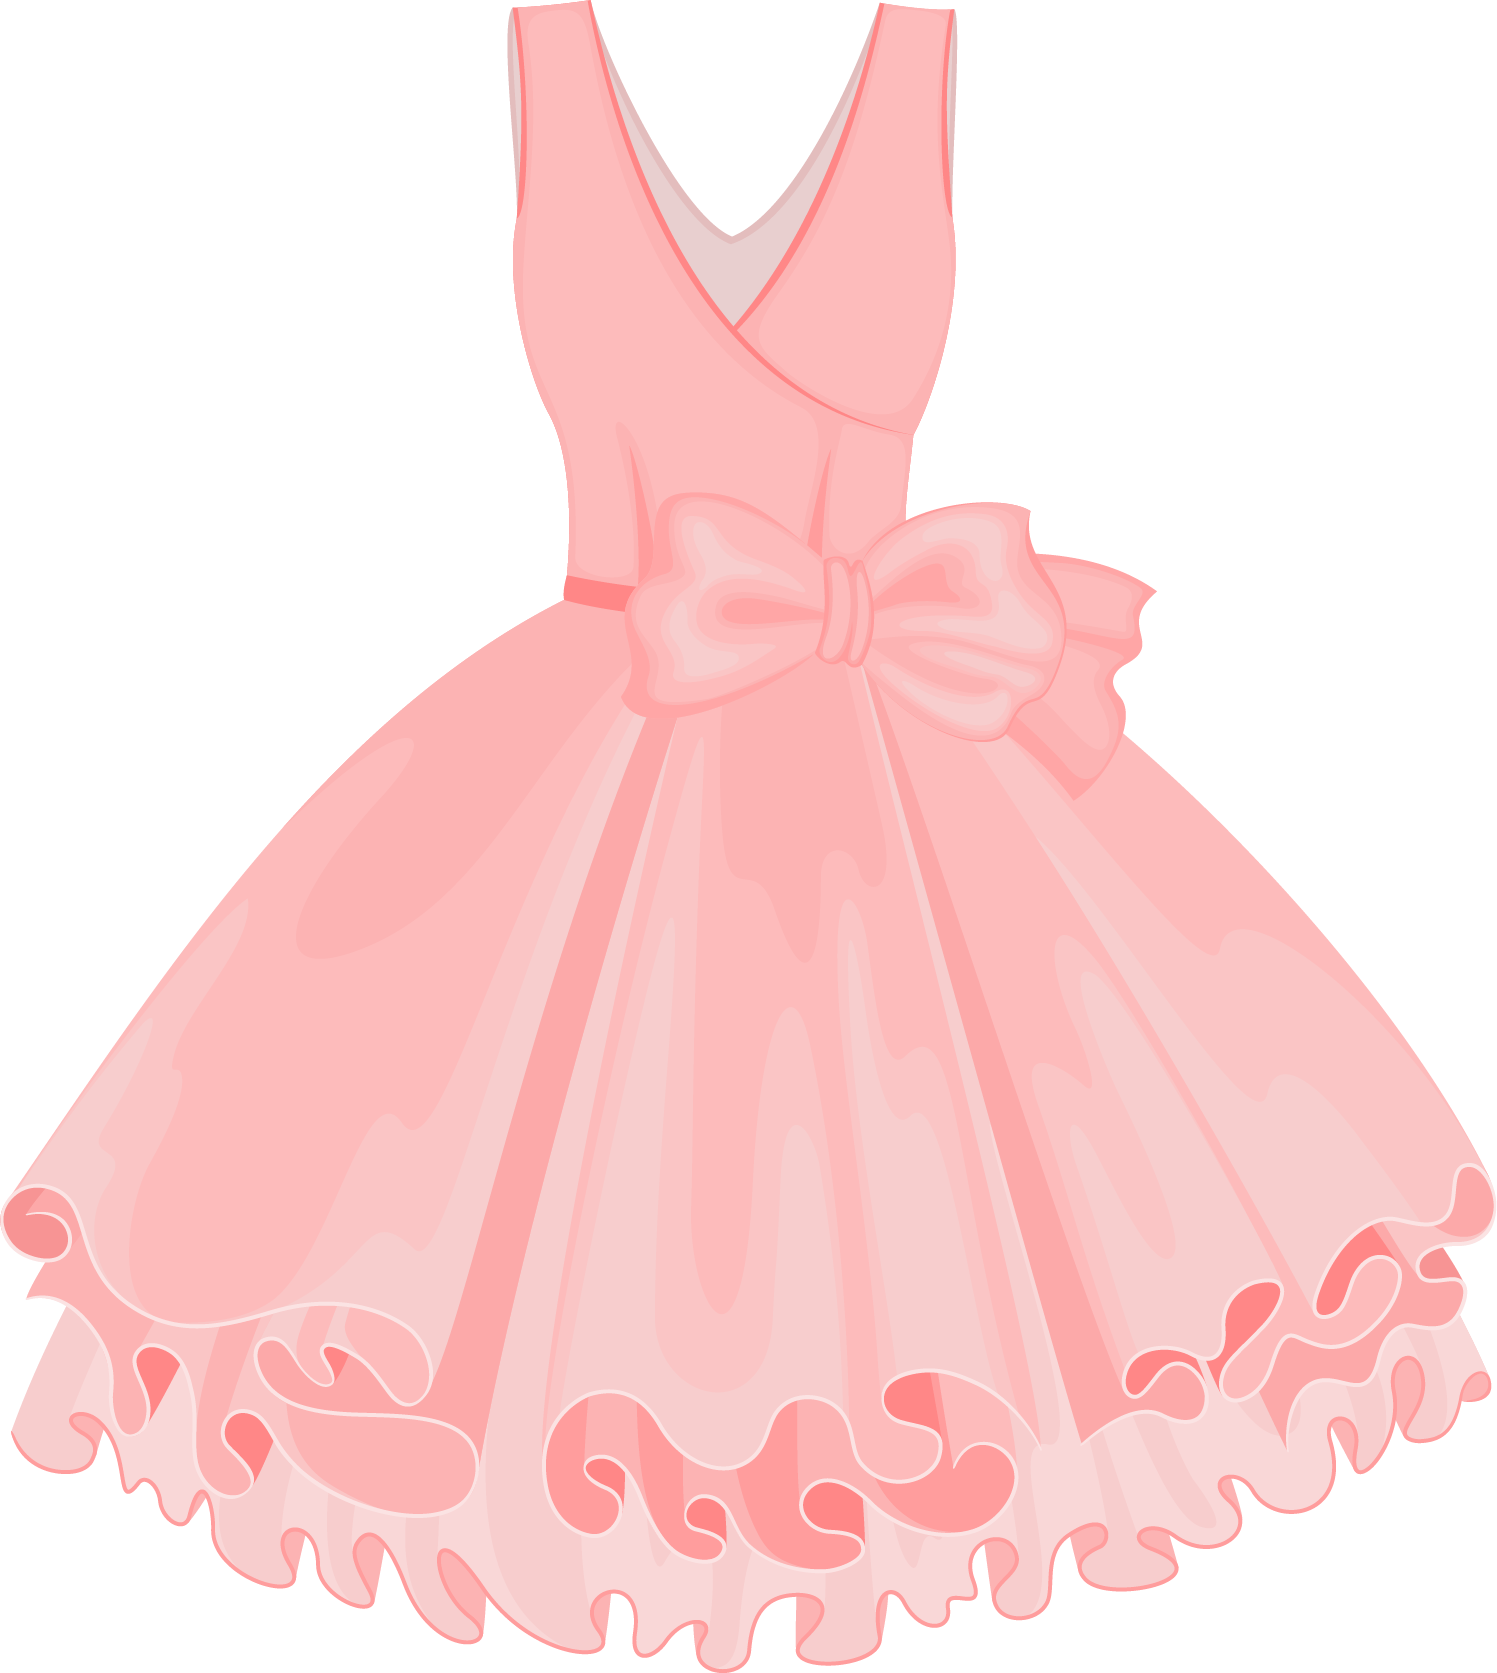 Dress Clipart Vector and other clipart images on Cliparts pub™